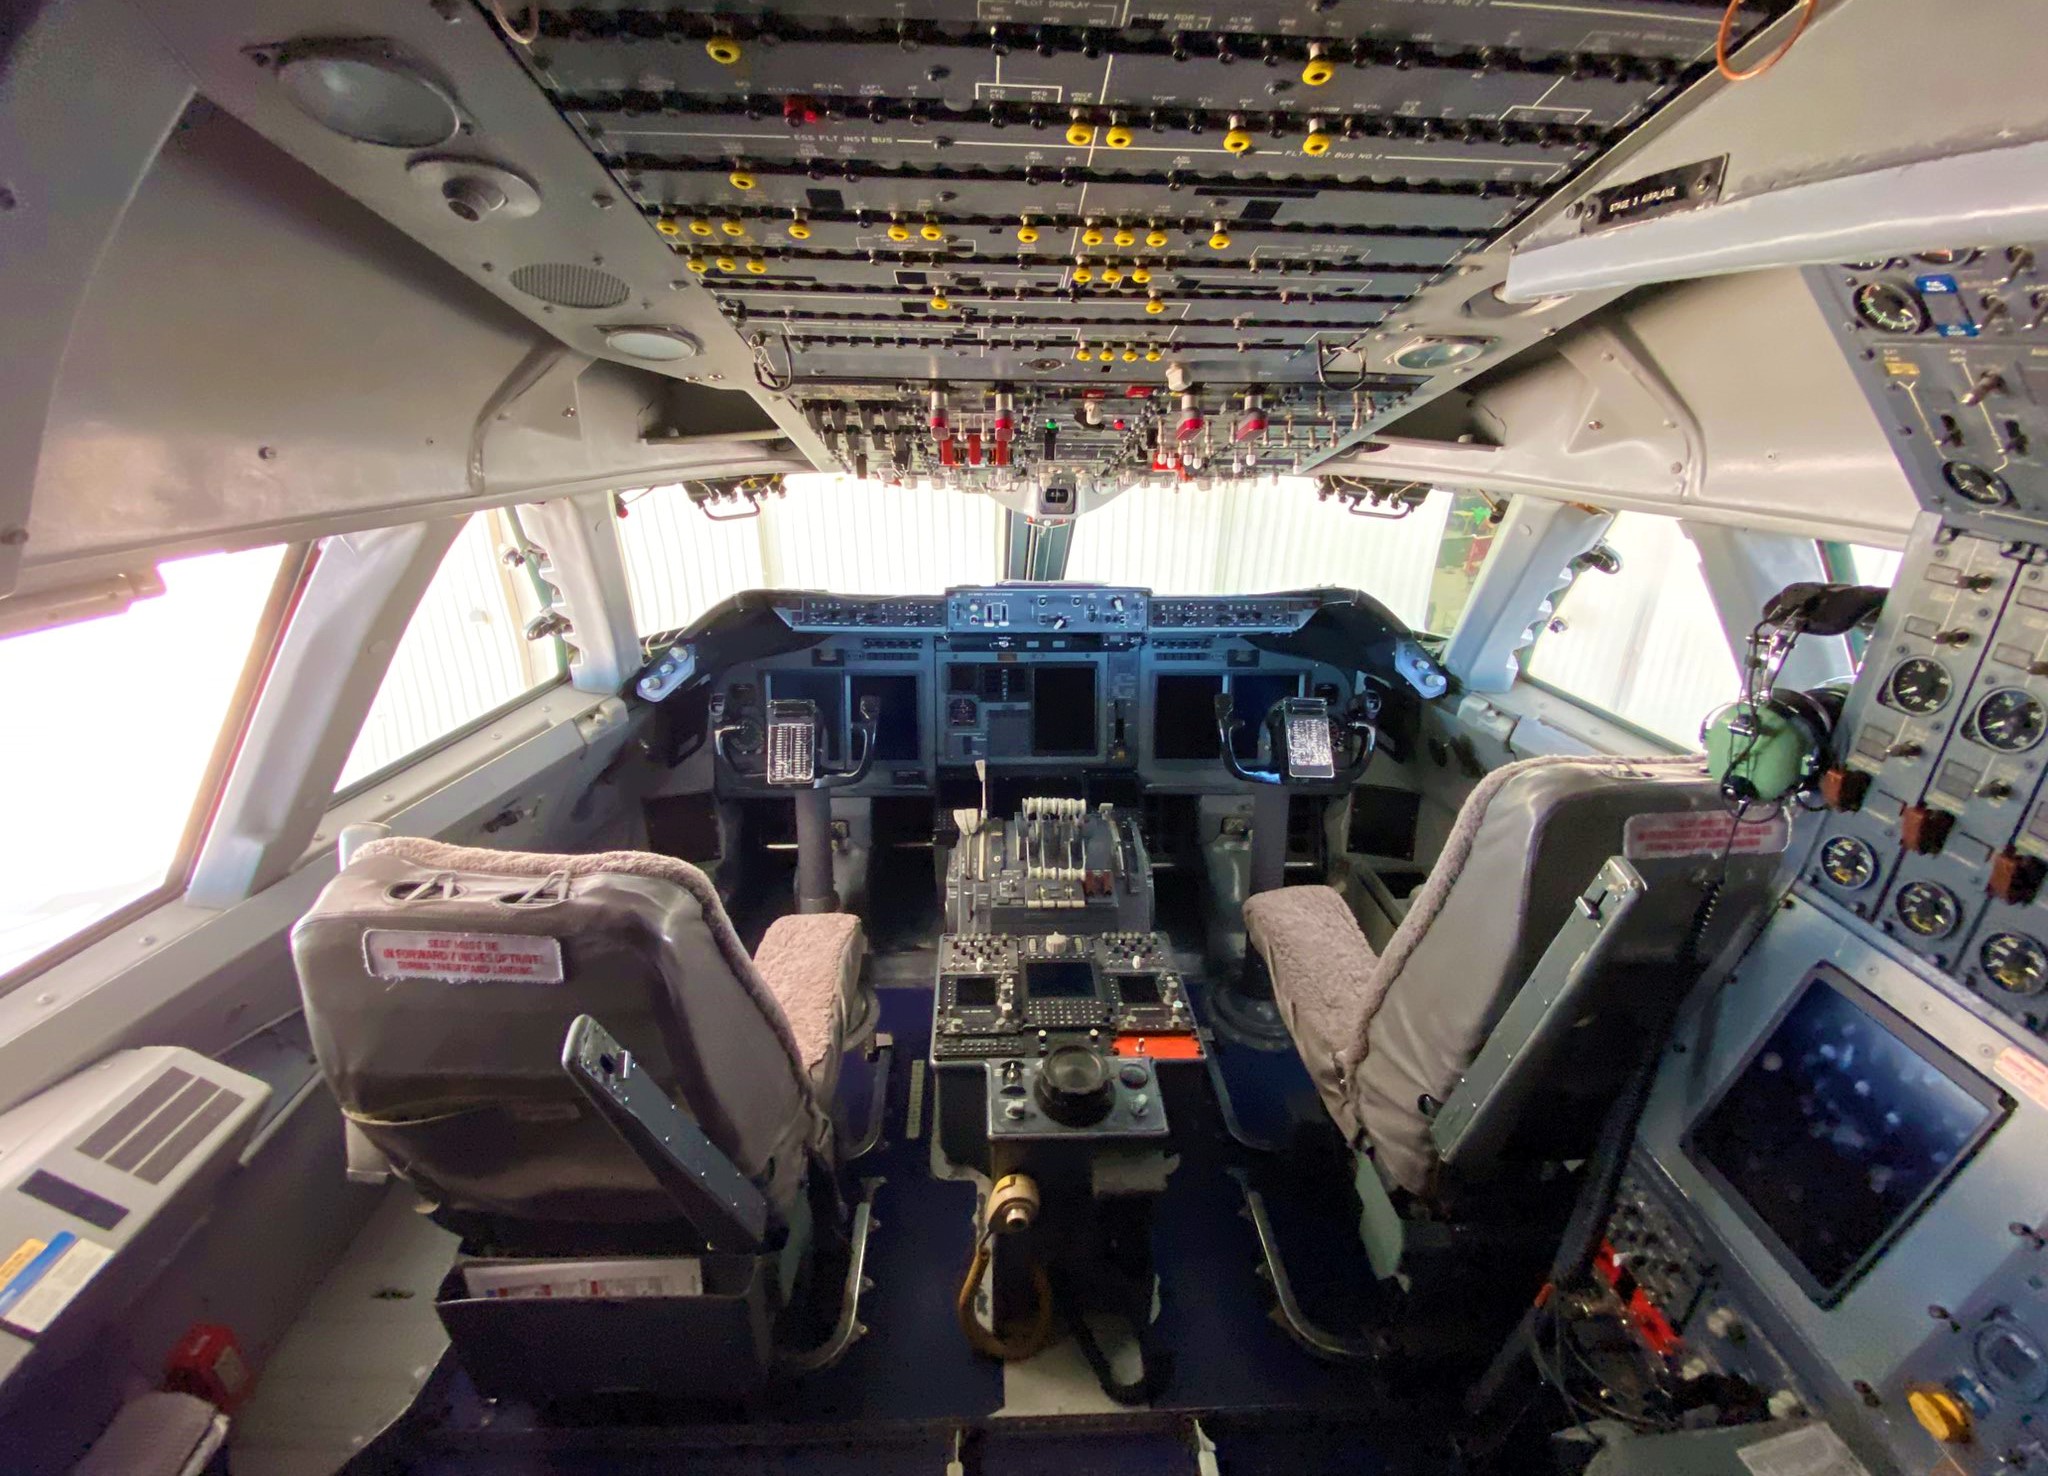  Federal Aviation Administration wants a secondary barrier on the flight deck of new commercial airplanes to ensure the safety of aircraft and occupants.